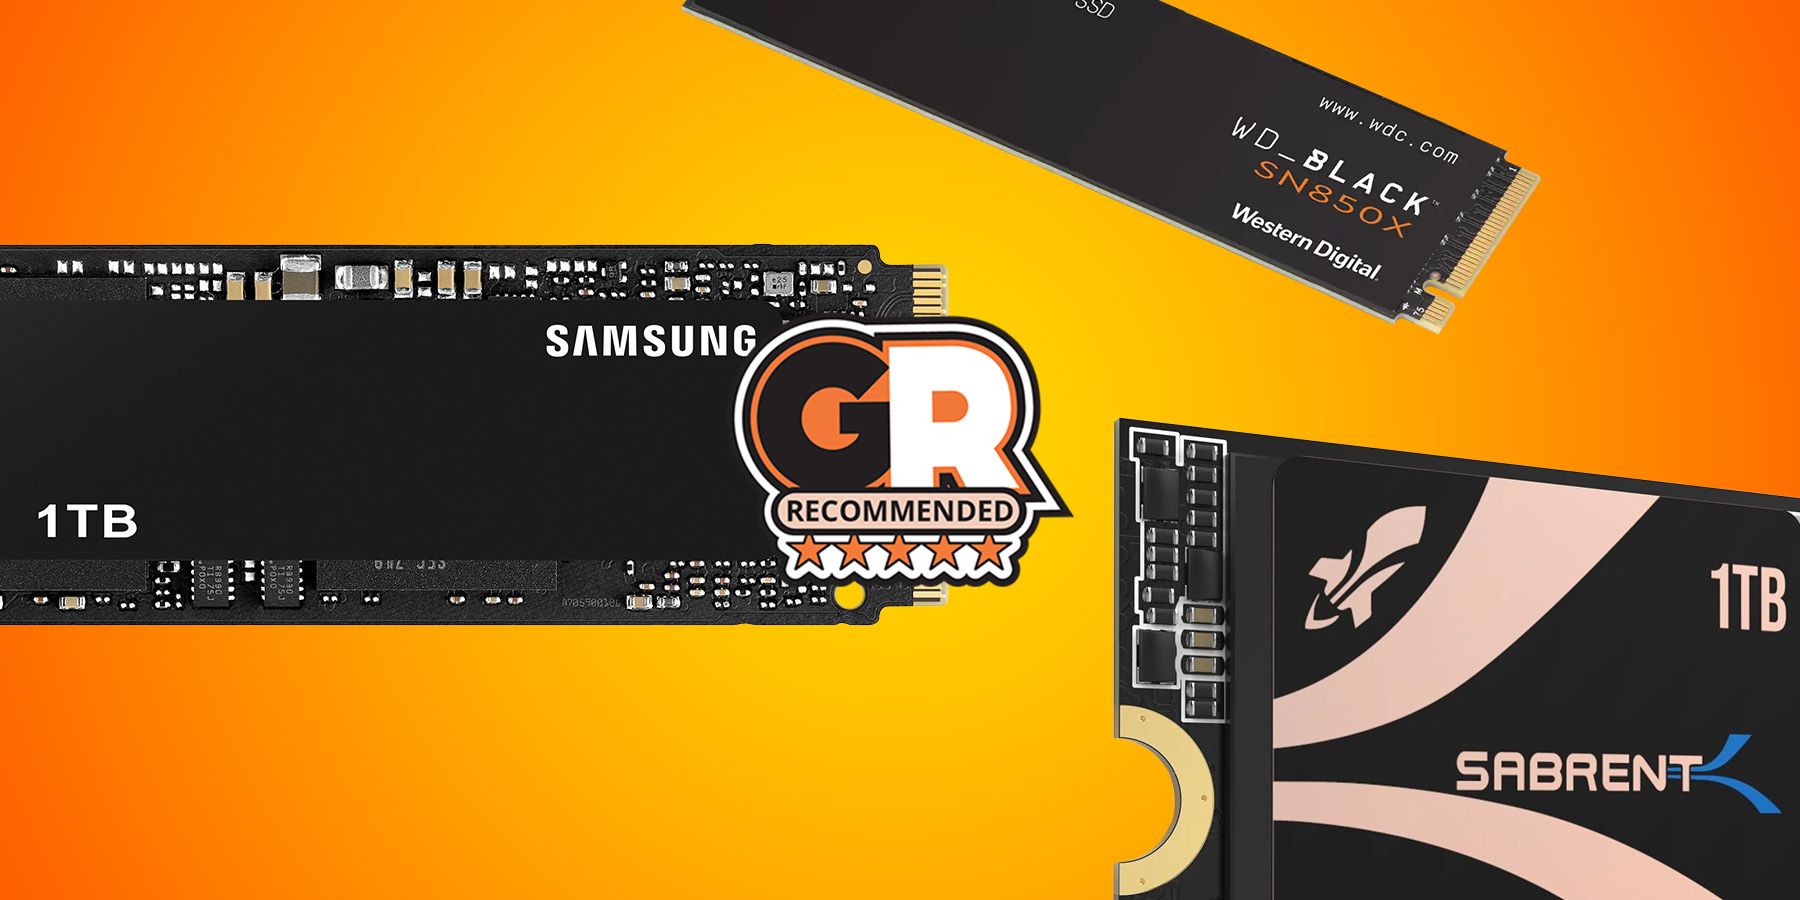 The Best SSDs for Gaming in 2023 samsung sabrent western digital Thumb